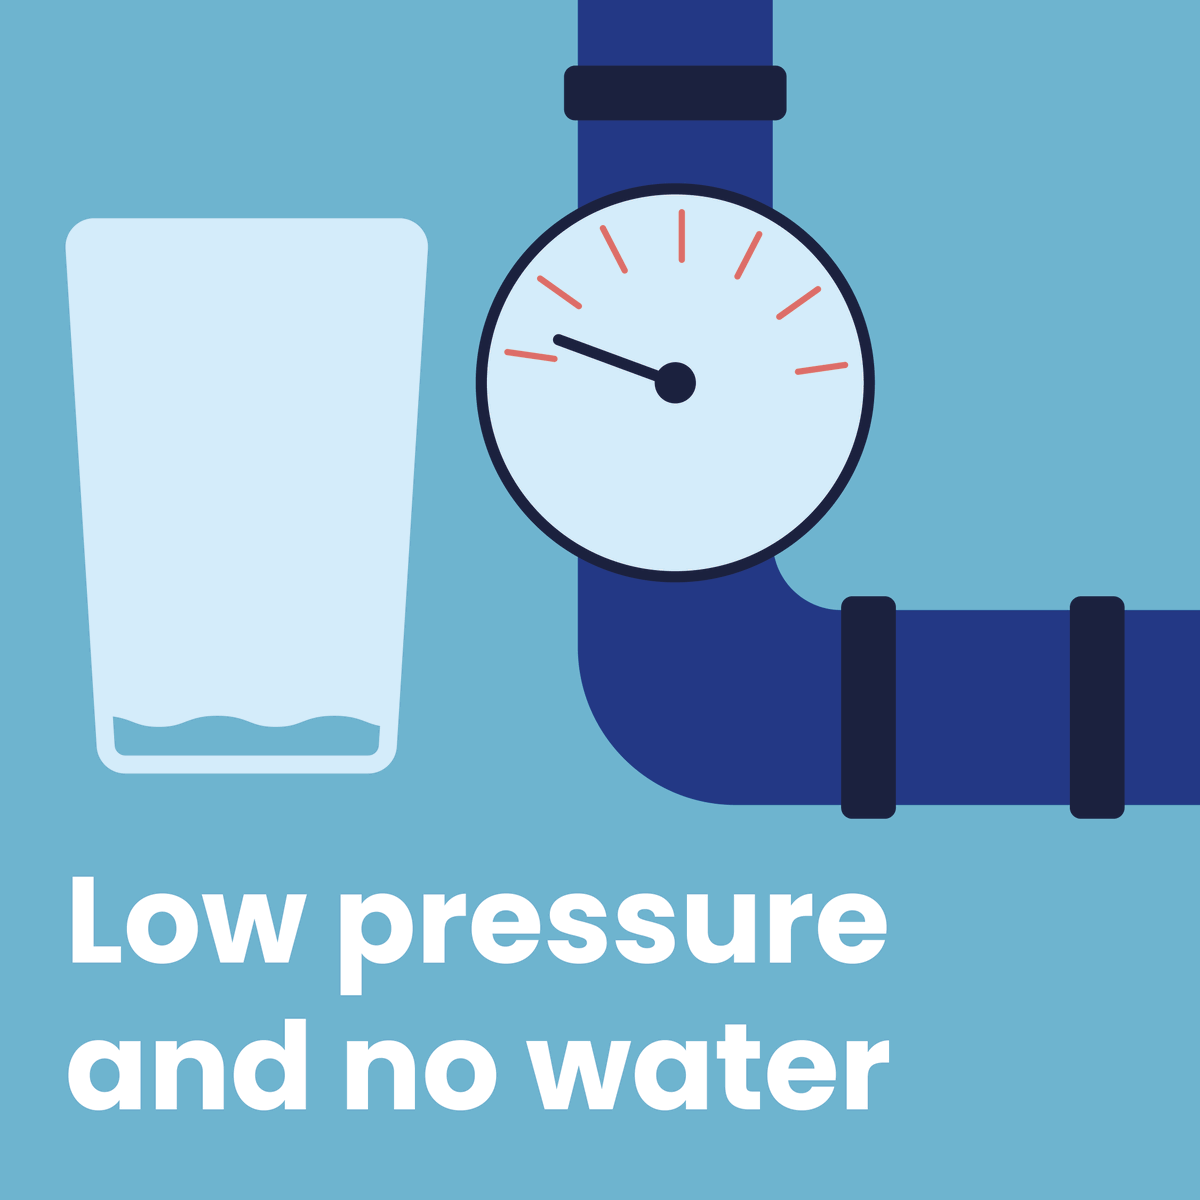 ⚠️#Bedale #DL8 / HG4 We’re aware that some customers in DL8 /HG4 may be experiencing low pressure or no water. We’re really sorry about this & our teams are in the area investigating the issue. We appreciate your patience & we'll keep you updated on our progress. - Sam